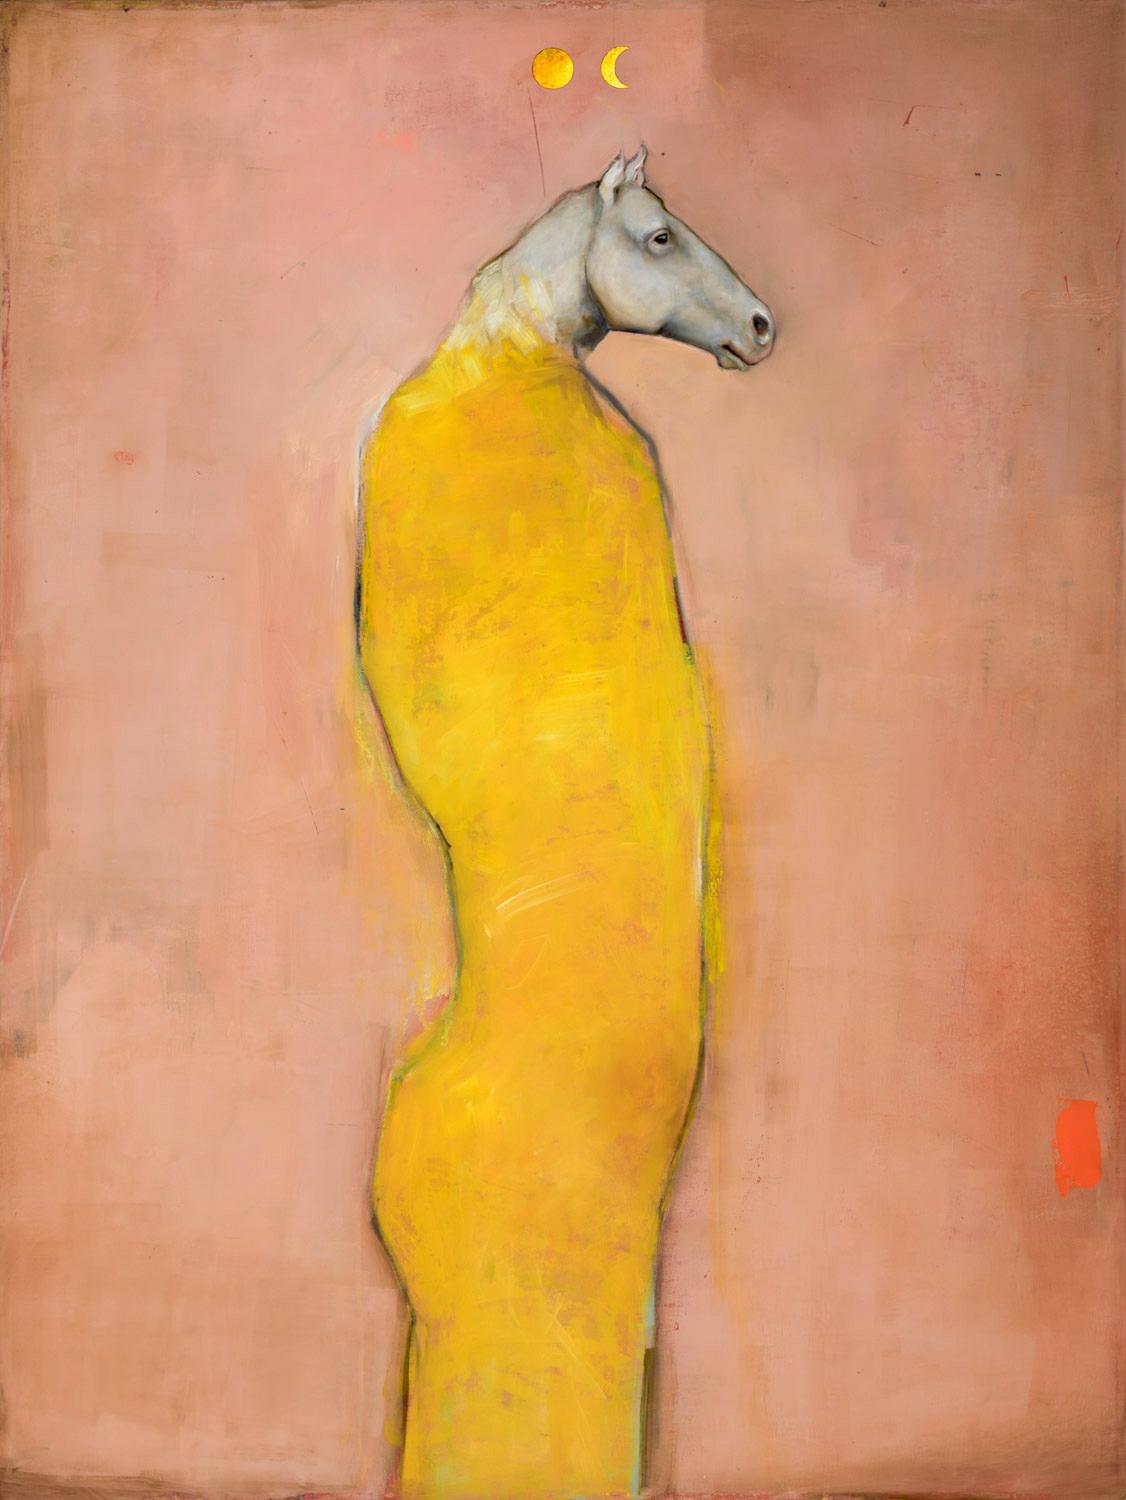 Michele Mikesell Portrait Painting - Eos -Mythical horse figure, Oil on canvas, pop contemporary whimsical painting